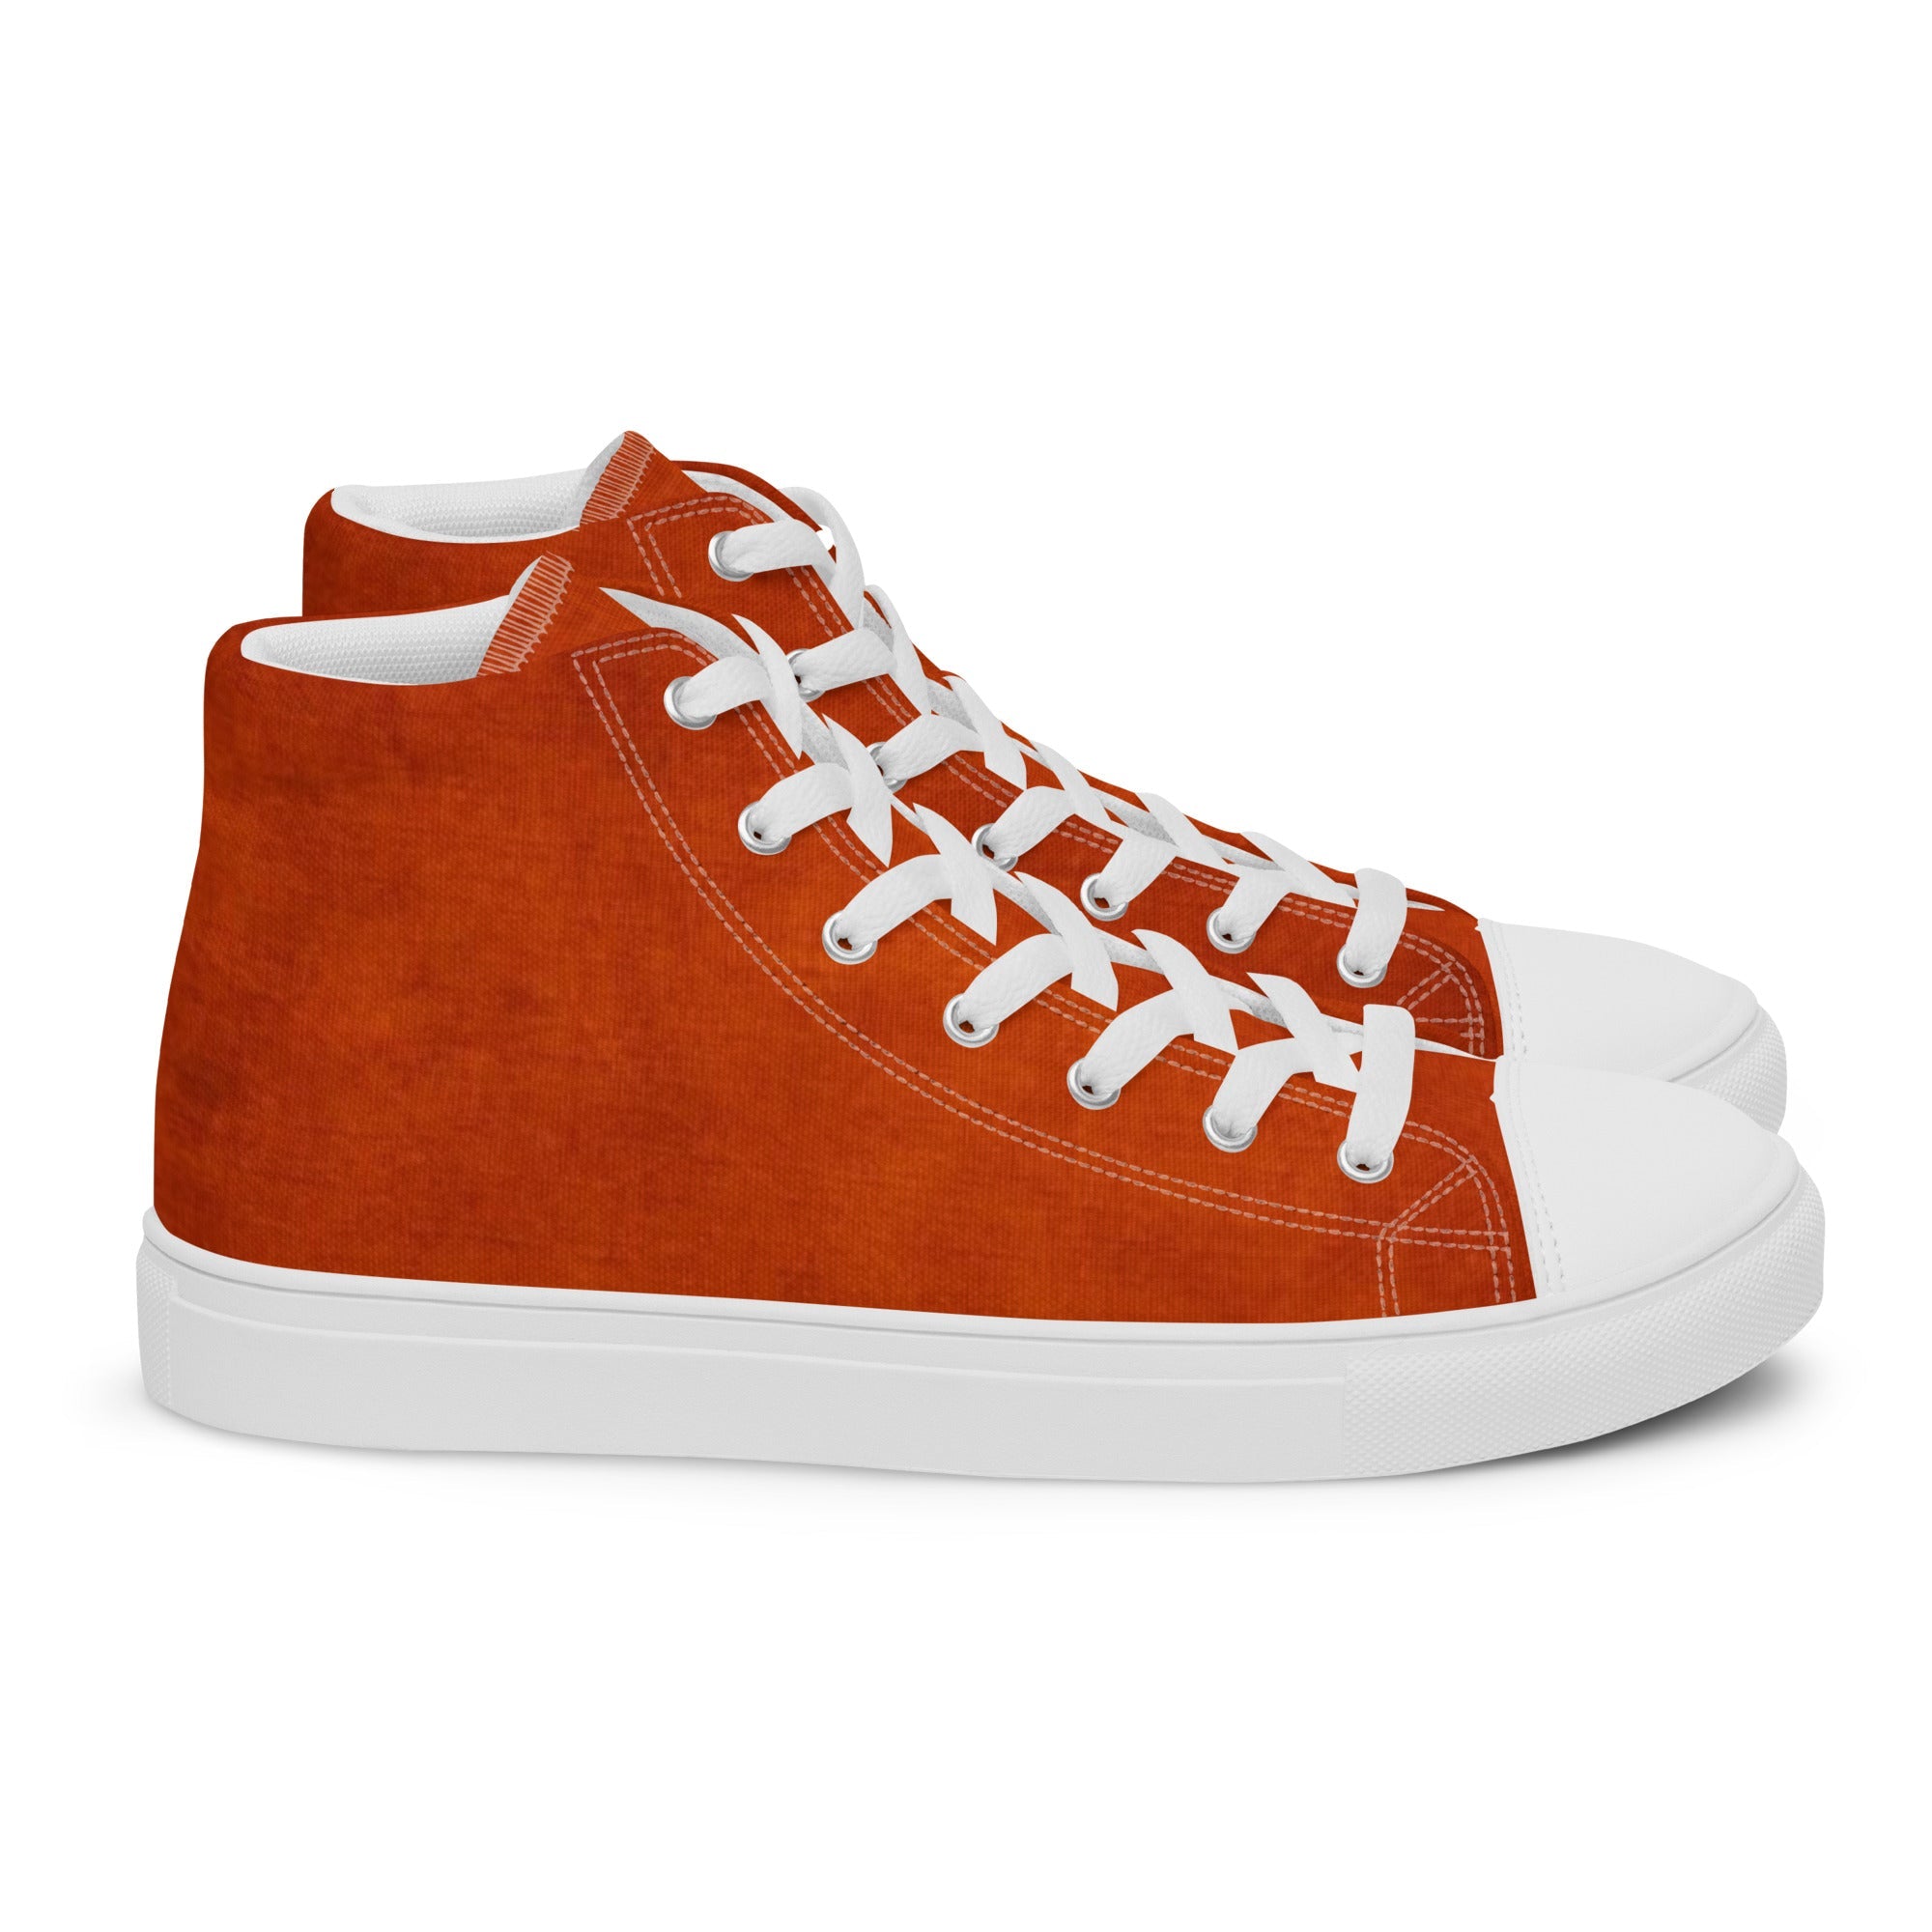 Womens high top canvas shoes